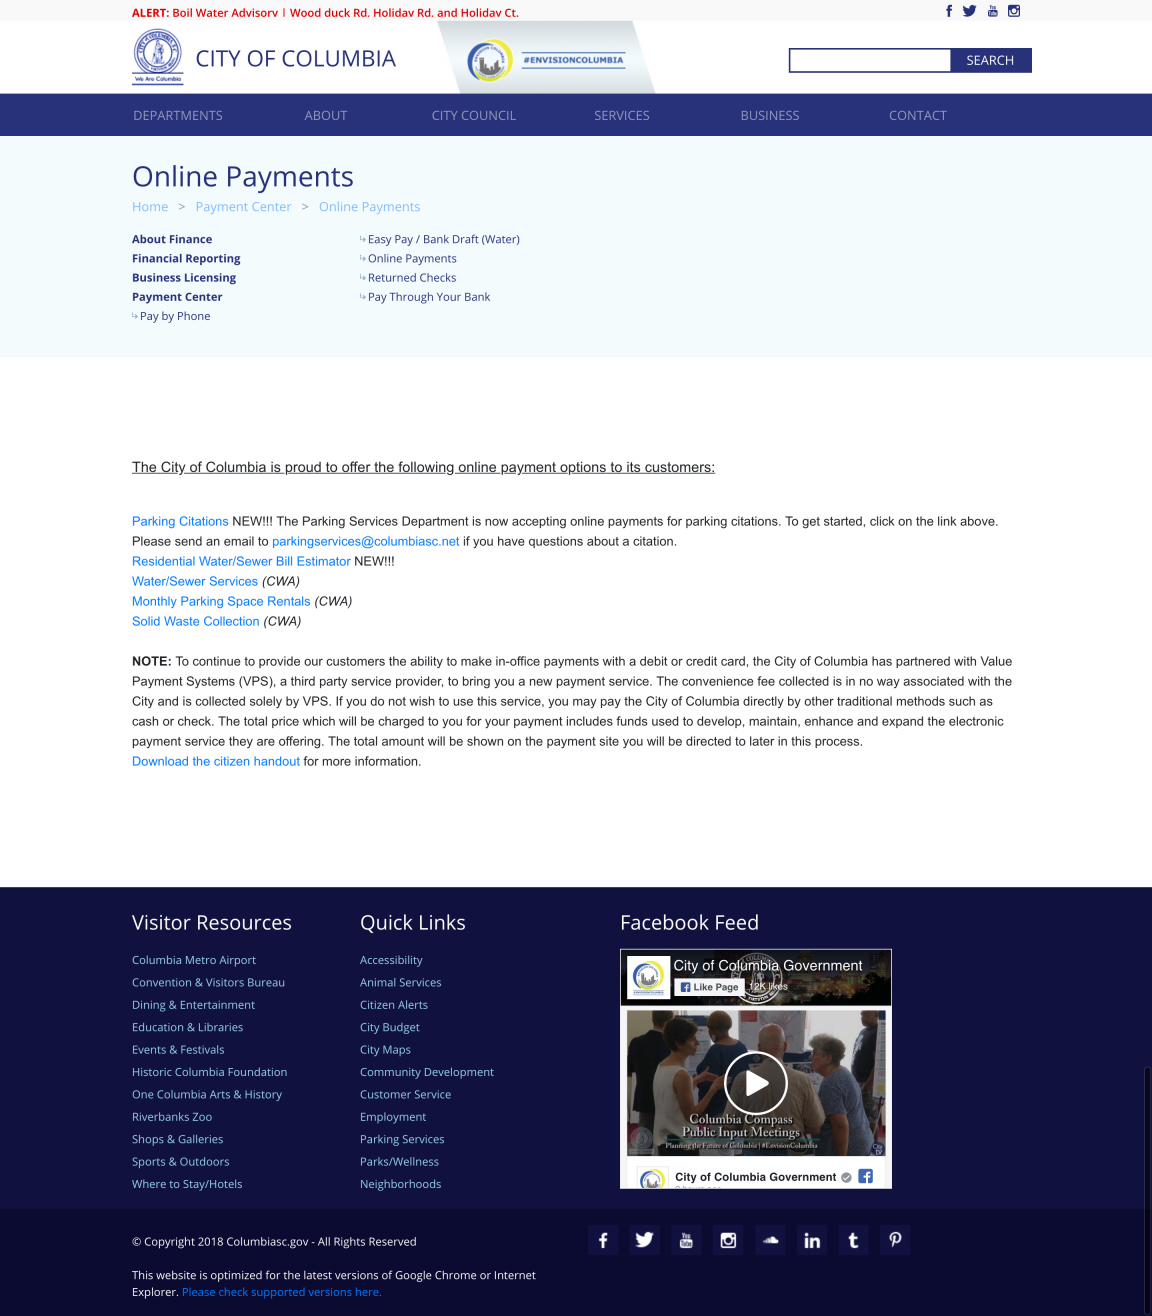 The 'Online Payments' page from the City of Columbia website. There are paragraphs and lots of in-line links, along with a video to watch their Facebook Feed. 